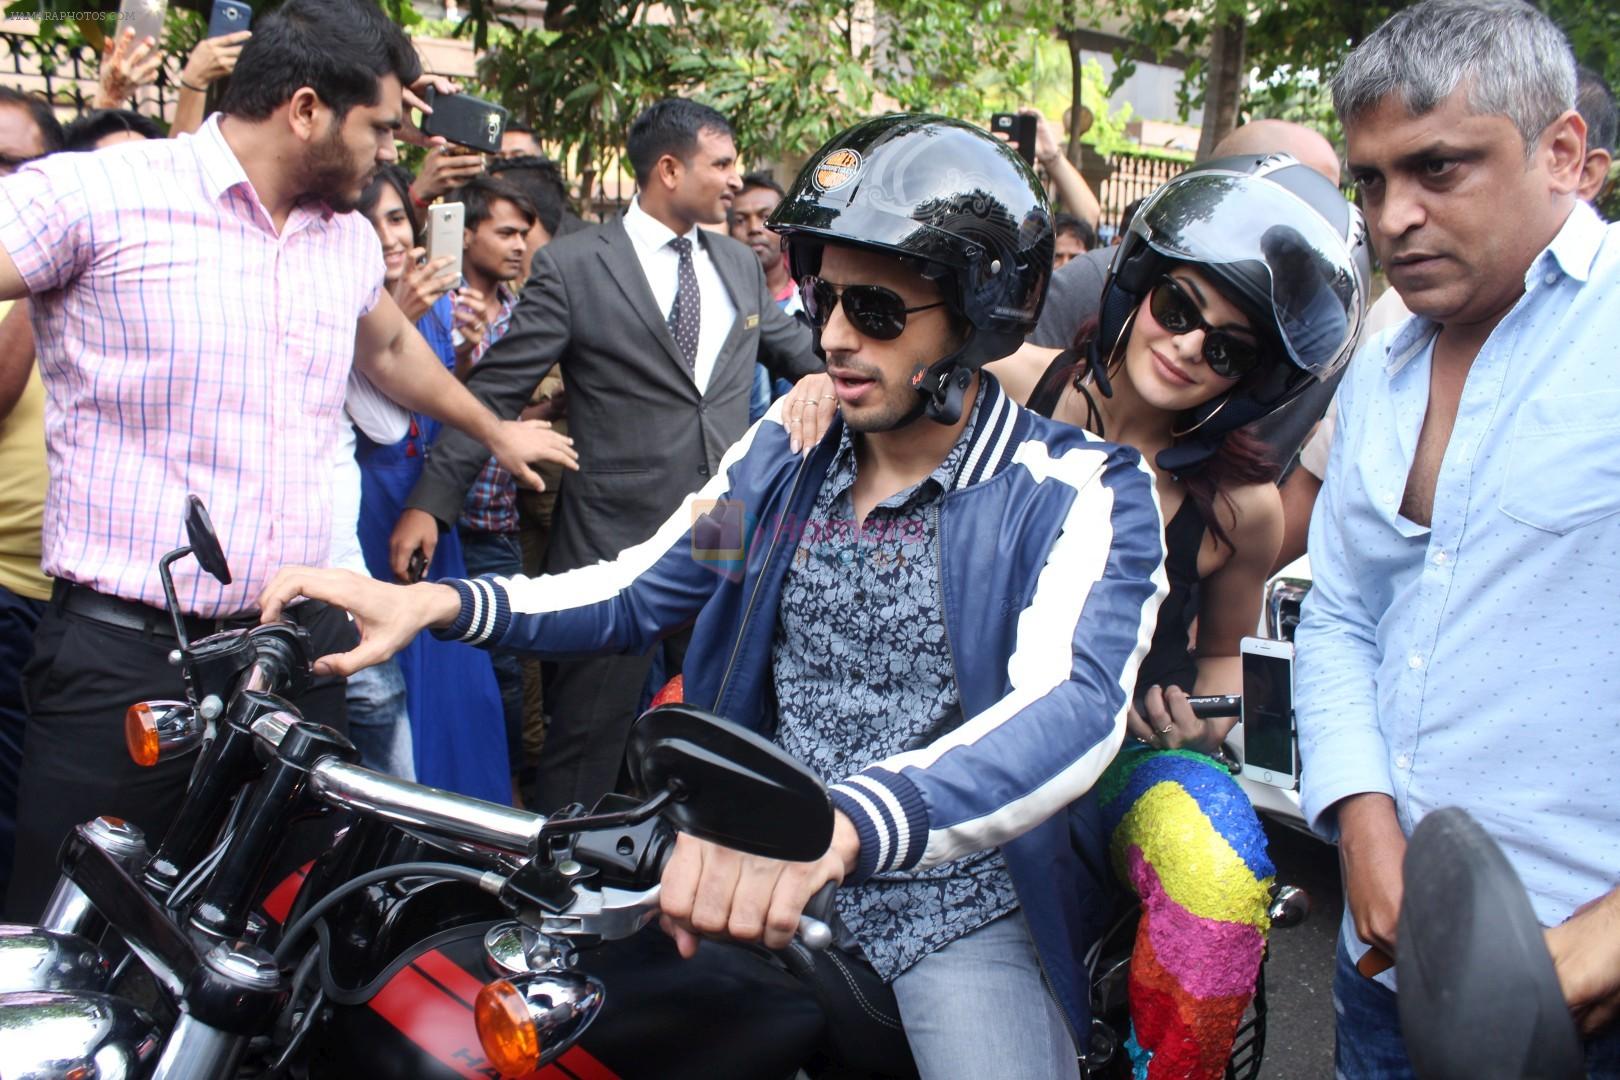 Sidharth Malhotra, Jacqueline Fernandez at Special Bike Ride At Bandstand to Promote Film A Gentleman on 17th Aug 2017